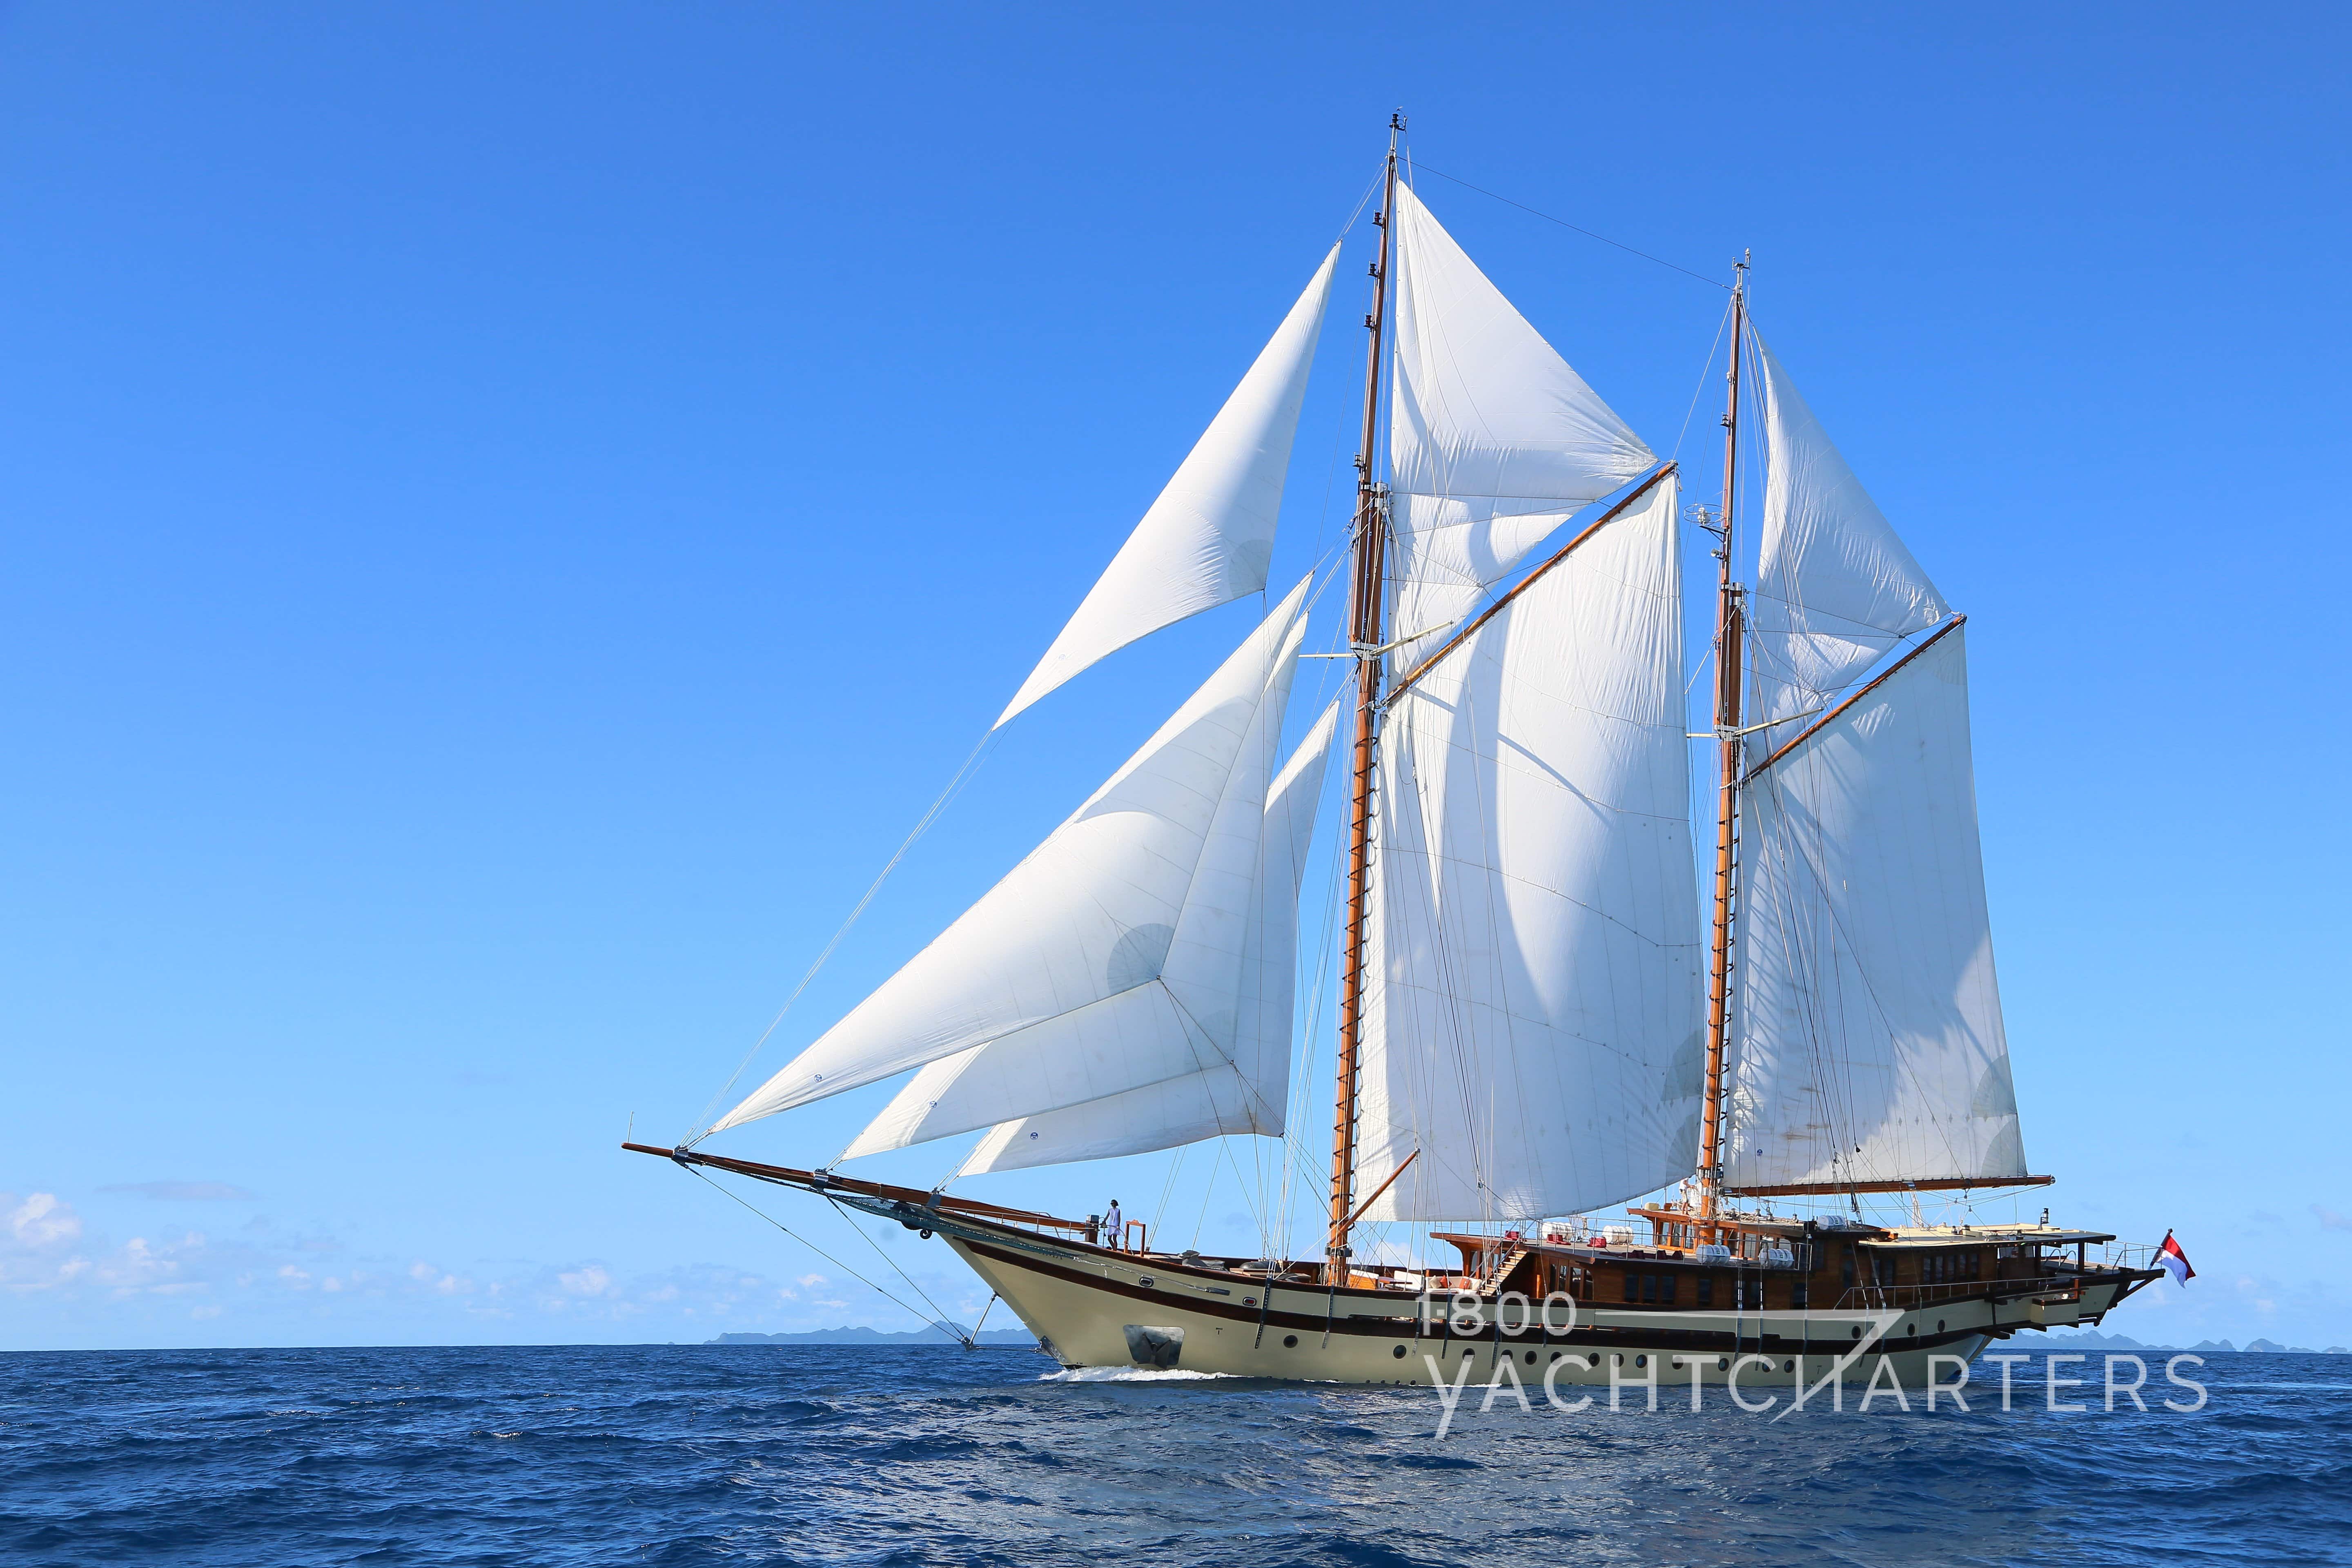 110' Yacht Gets Makeover For Sail Boat Charters In 